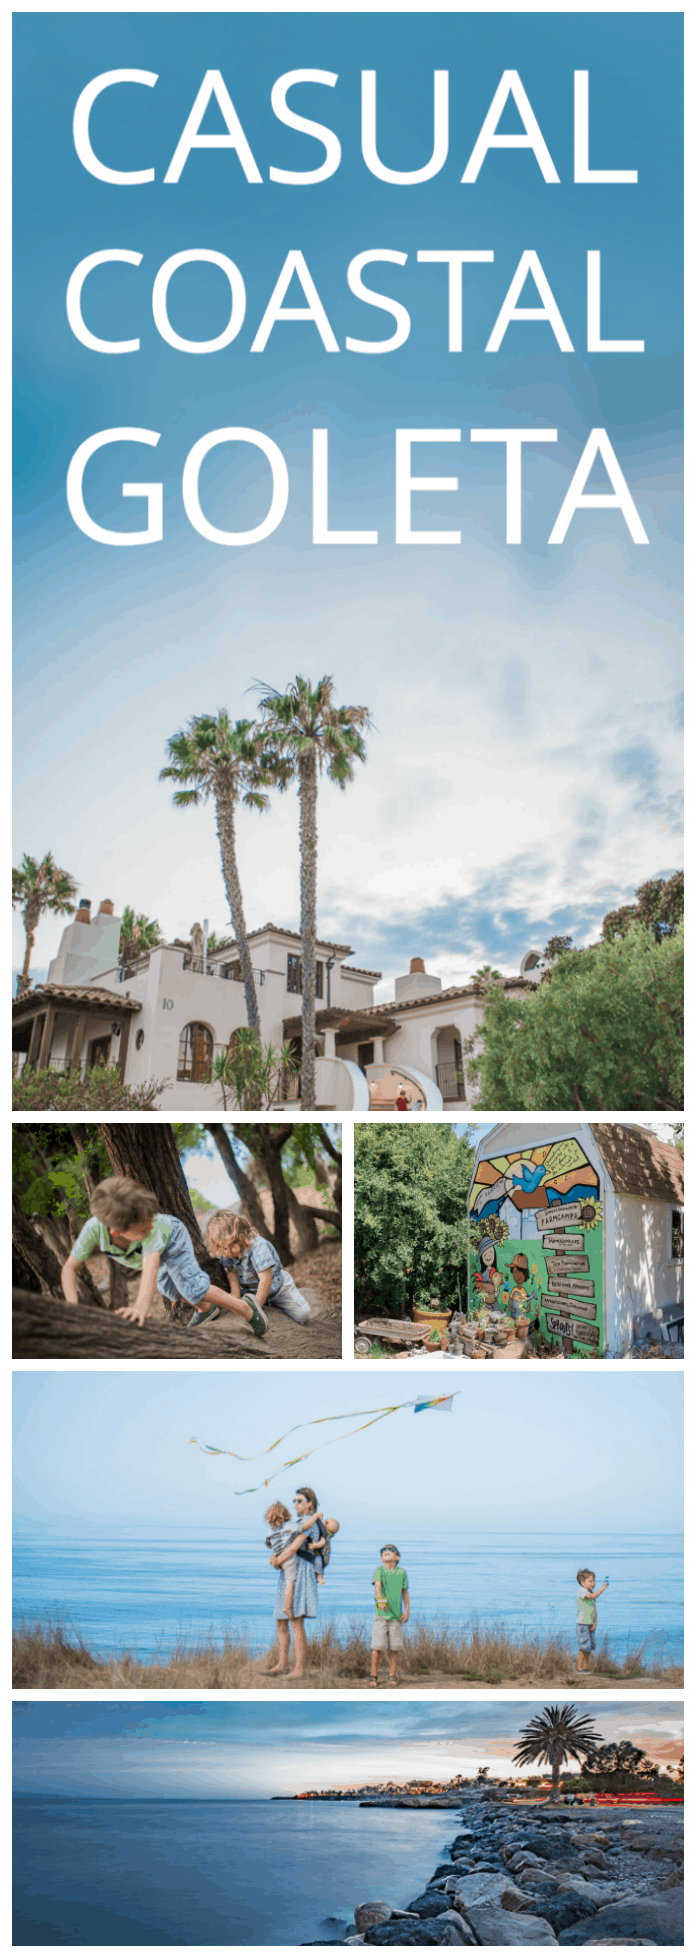 Goleta is the perfect California blend of oh-so-casual, stunningly beautiful and great for families.